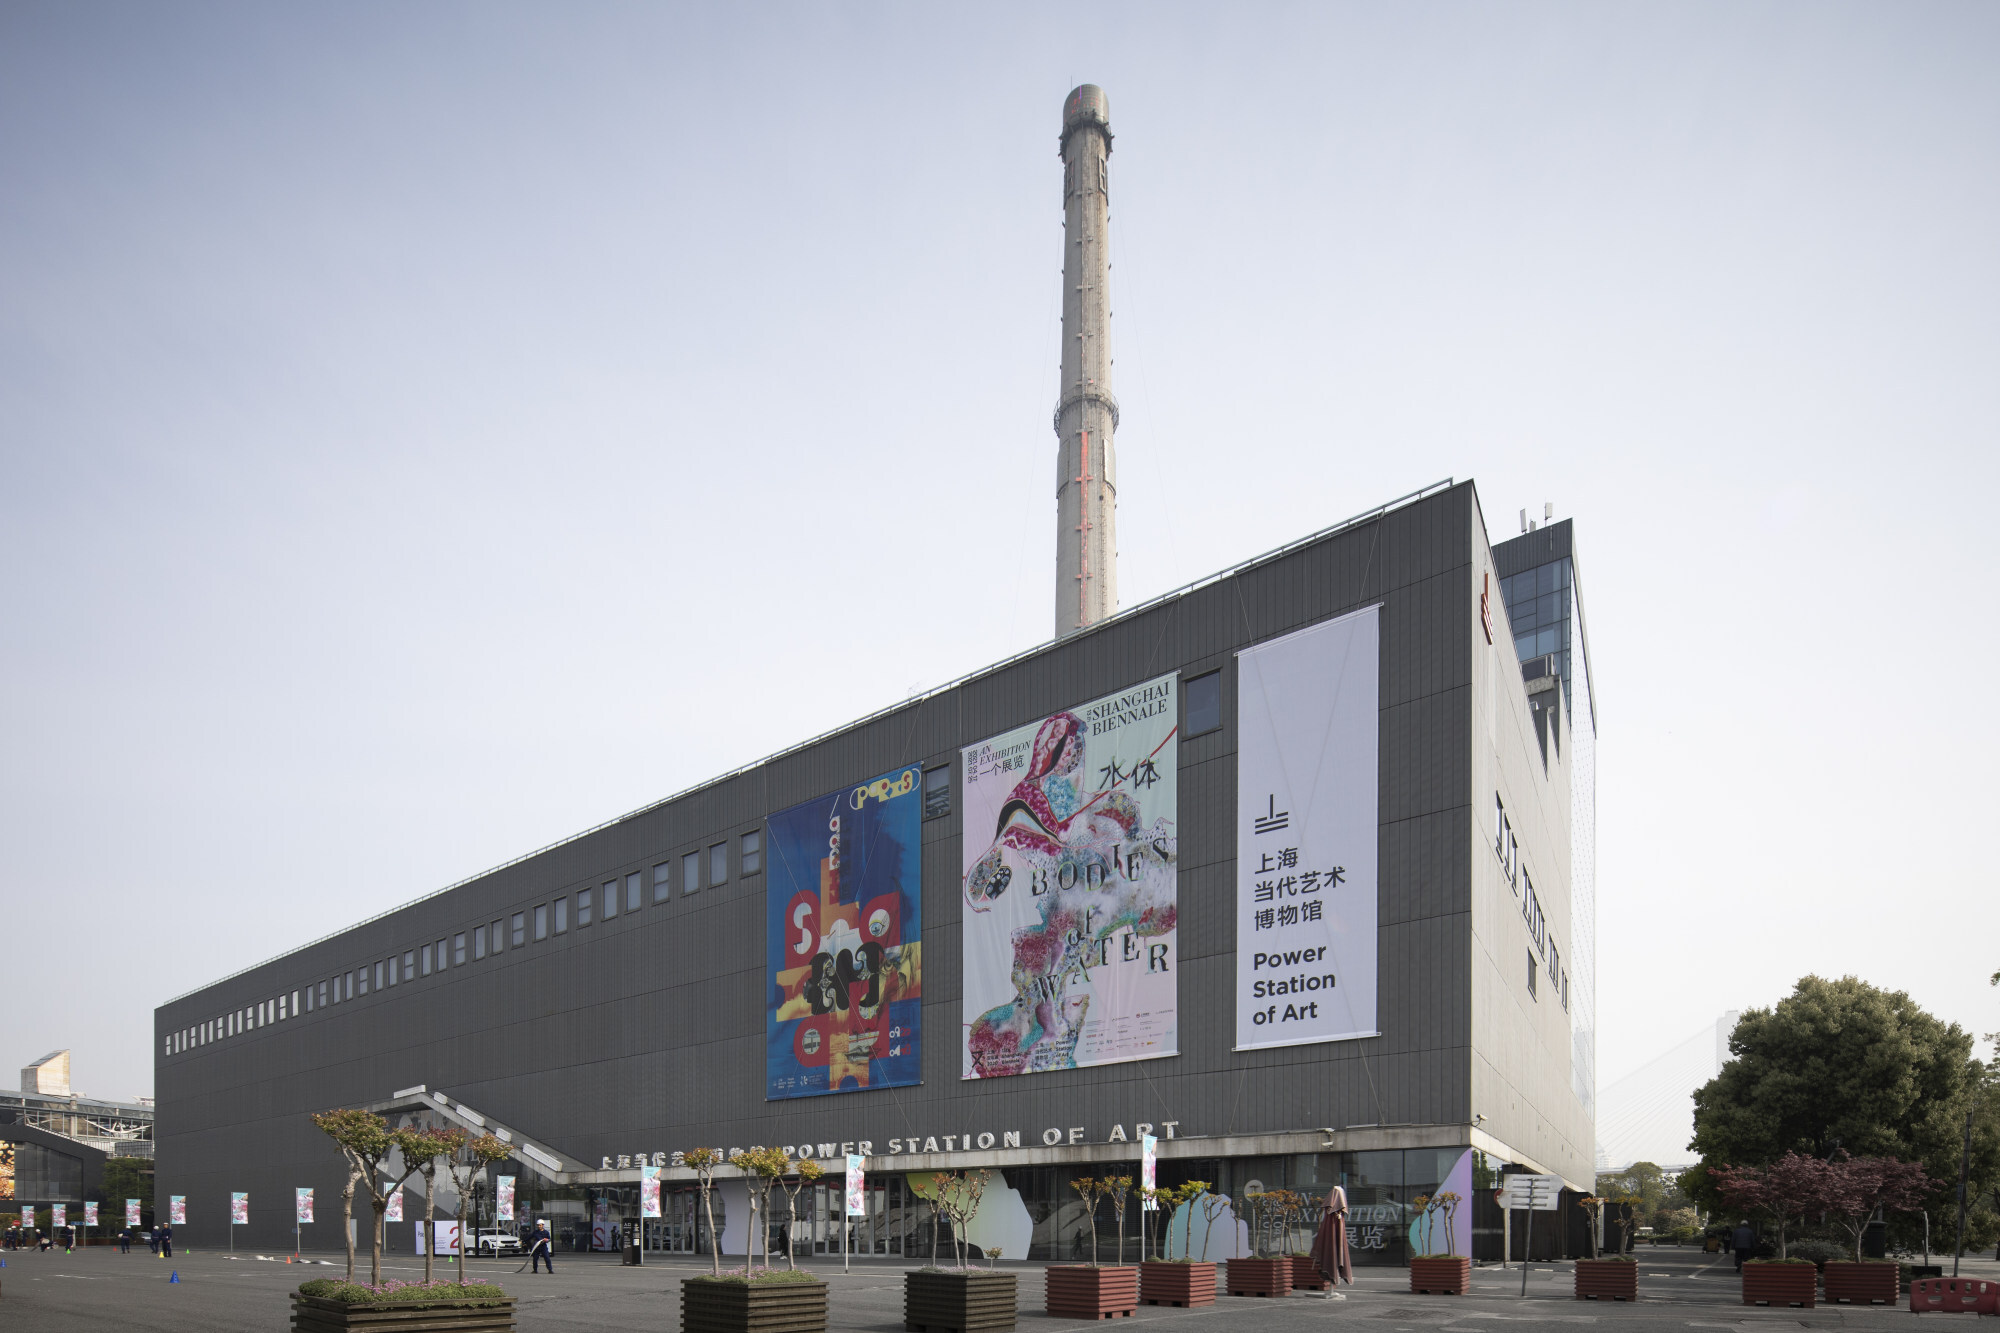  Power Station of Art in Shanghai, venue of the 13th Shanghai Biennale. Photo: Power Station of Art